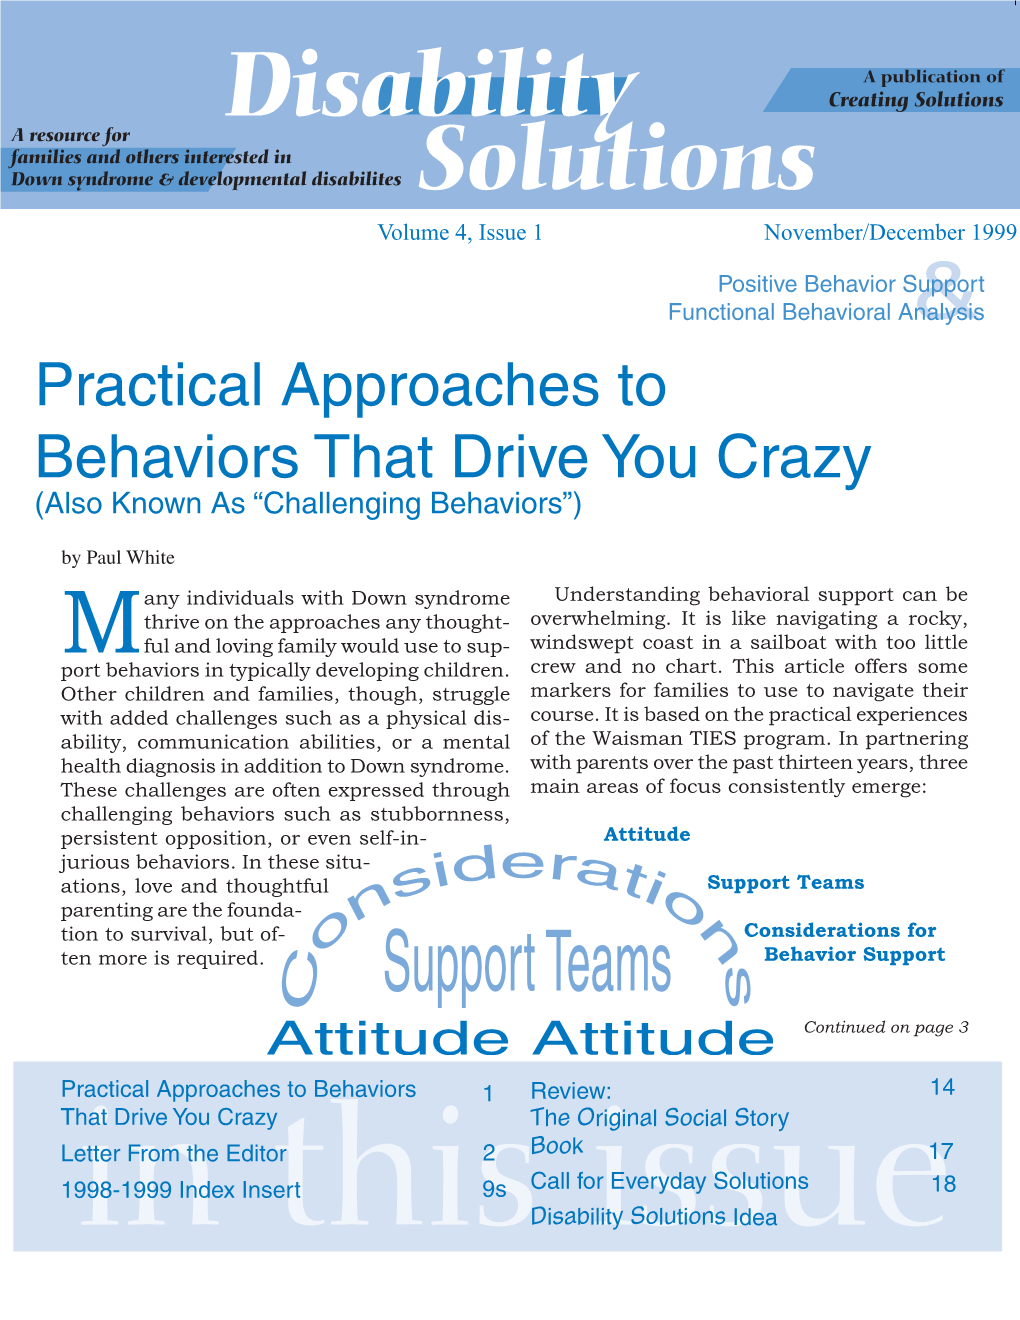 Practical Approaches to Behaviors That Drive You Crazy (Also Known As “Challenging Behaviors”)